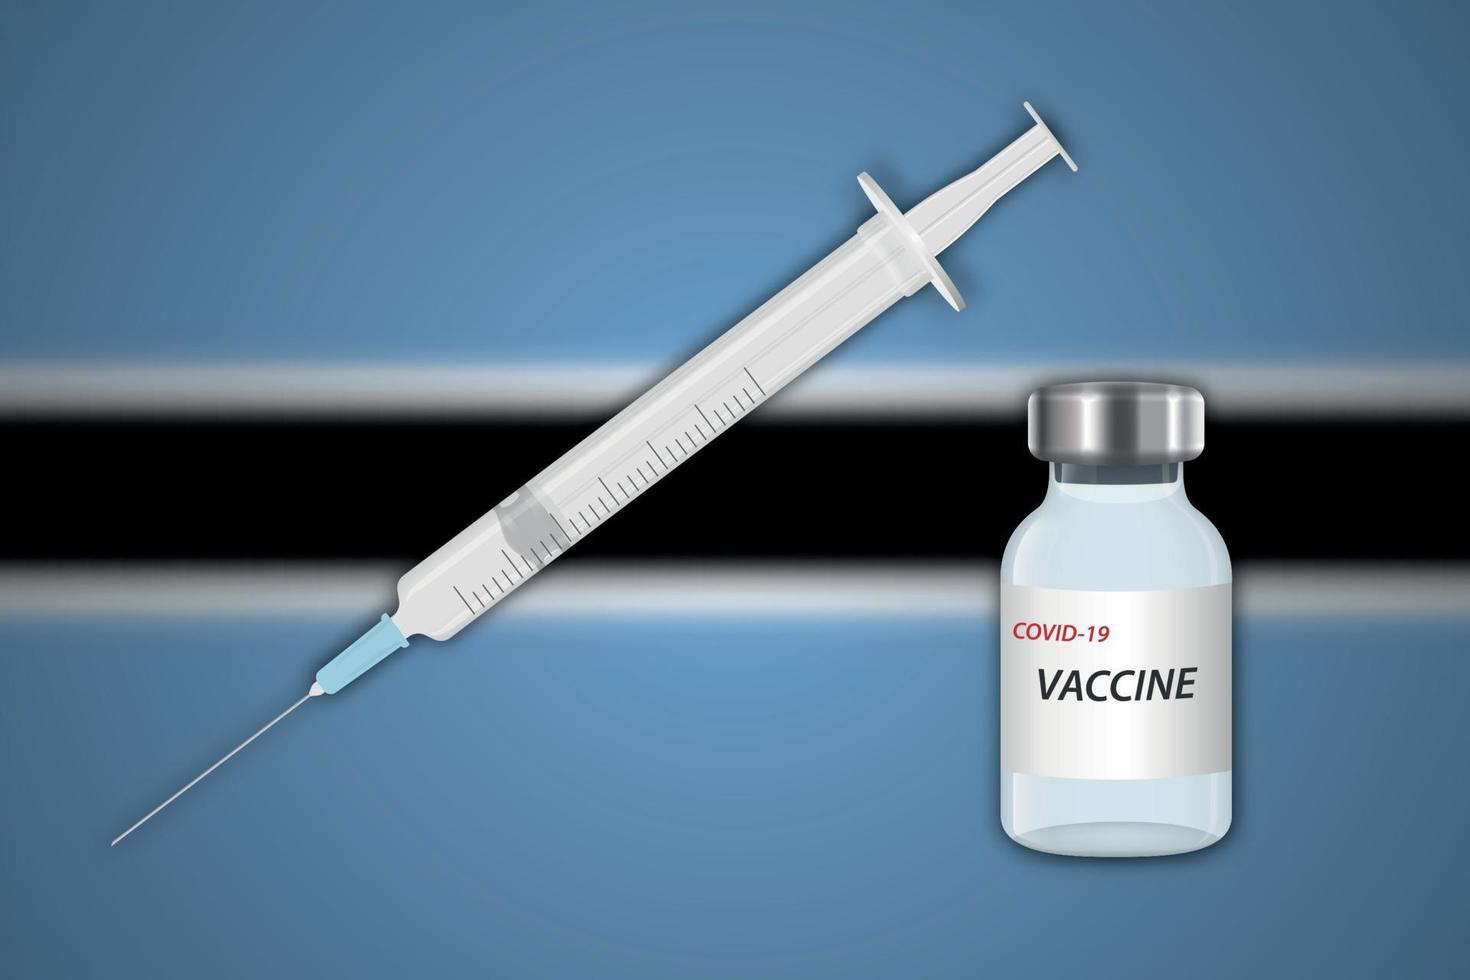 Syringe and vaccine vial on blur background with Botswana flag, vector